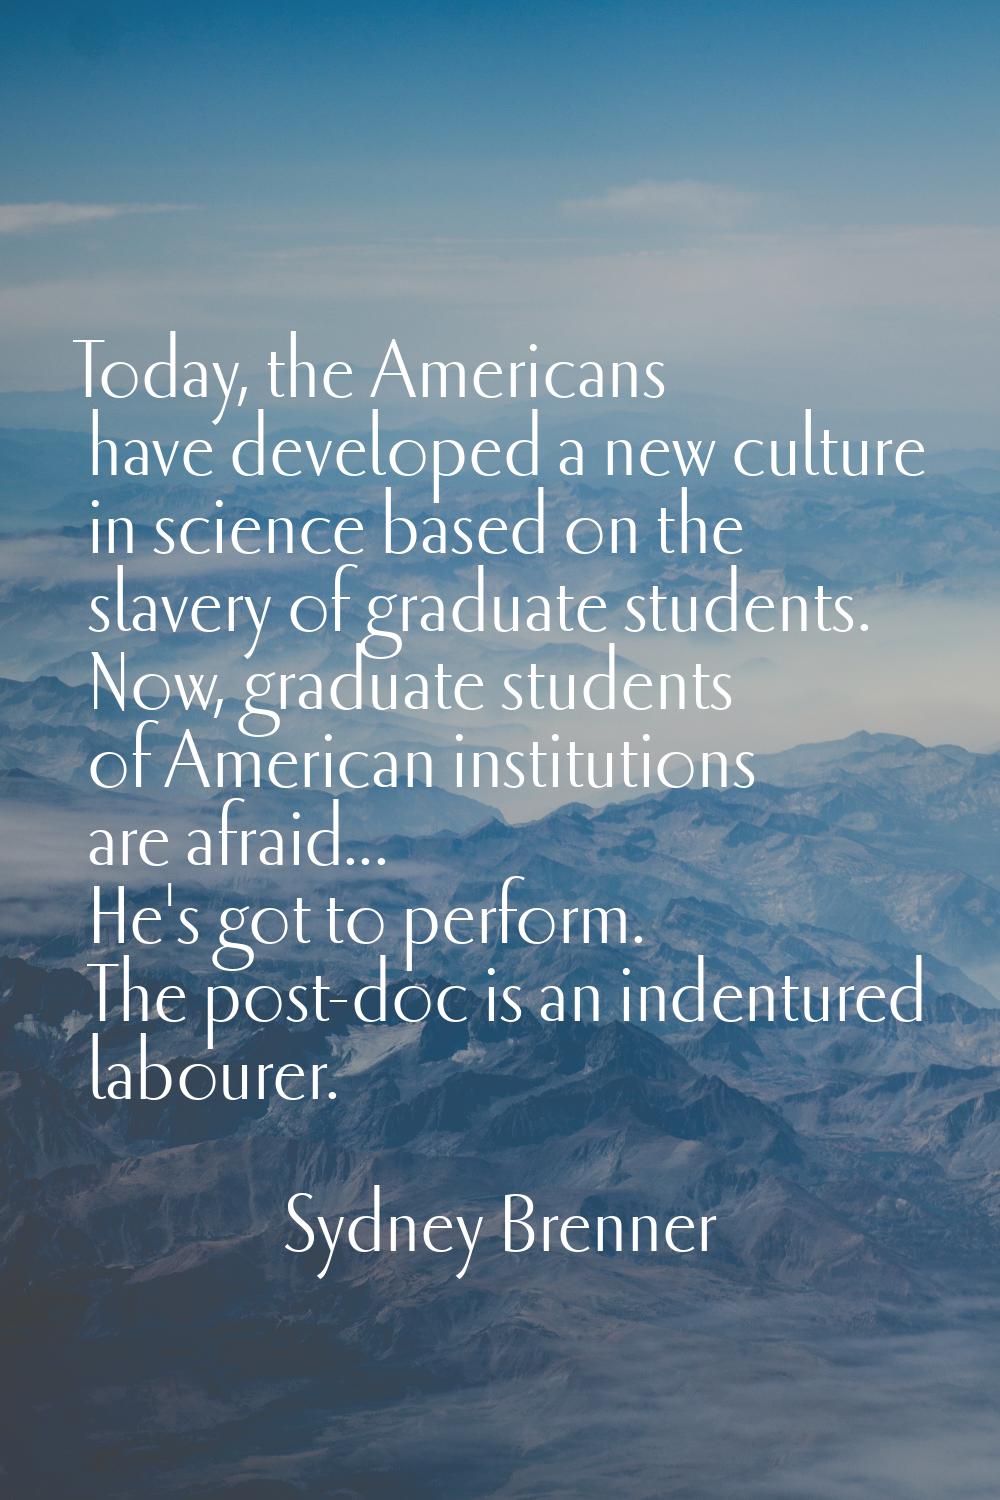 Today, the Americans have developed a new culture in science based on the slavery of graduate stude